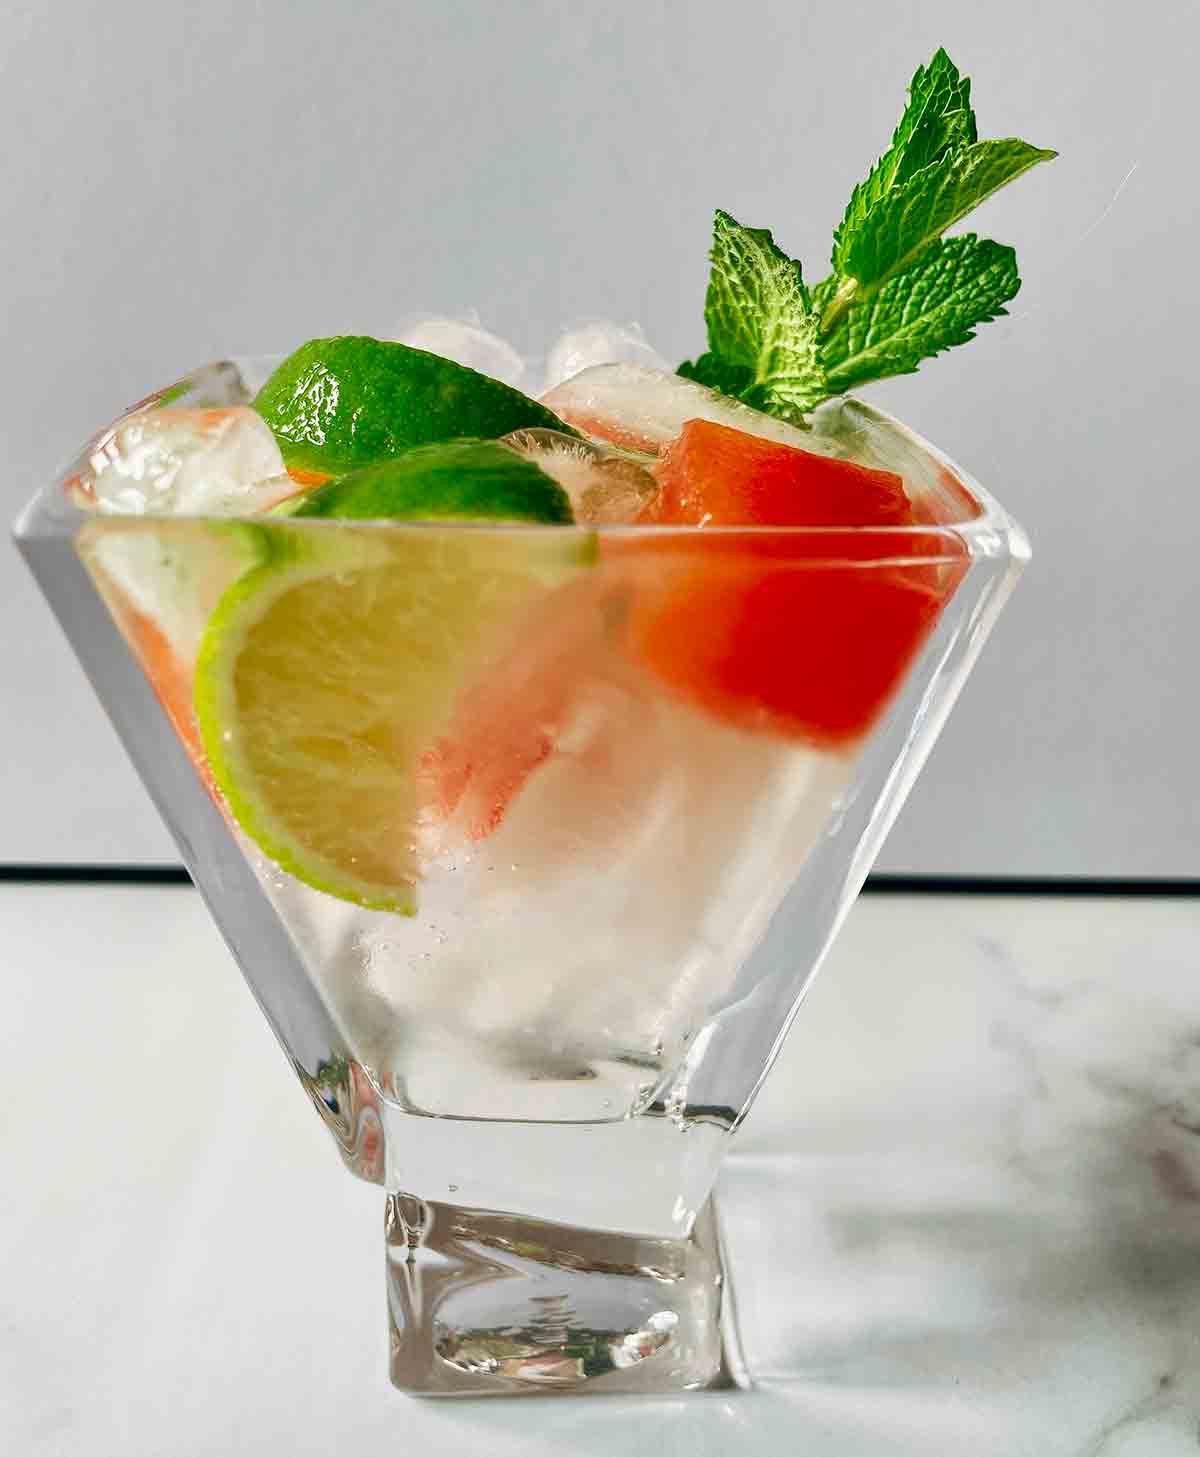 A short highball glass filled with watermelon Moscow mule, garnished with a mint sprig.